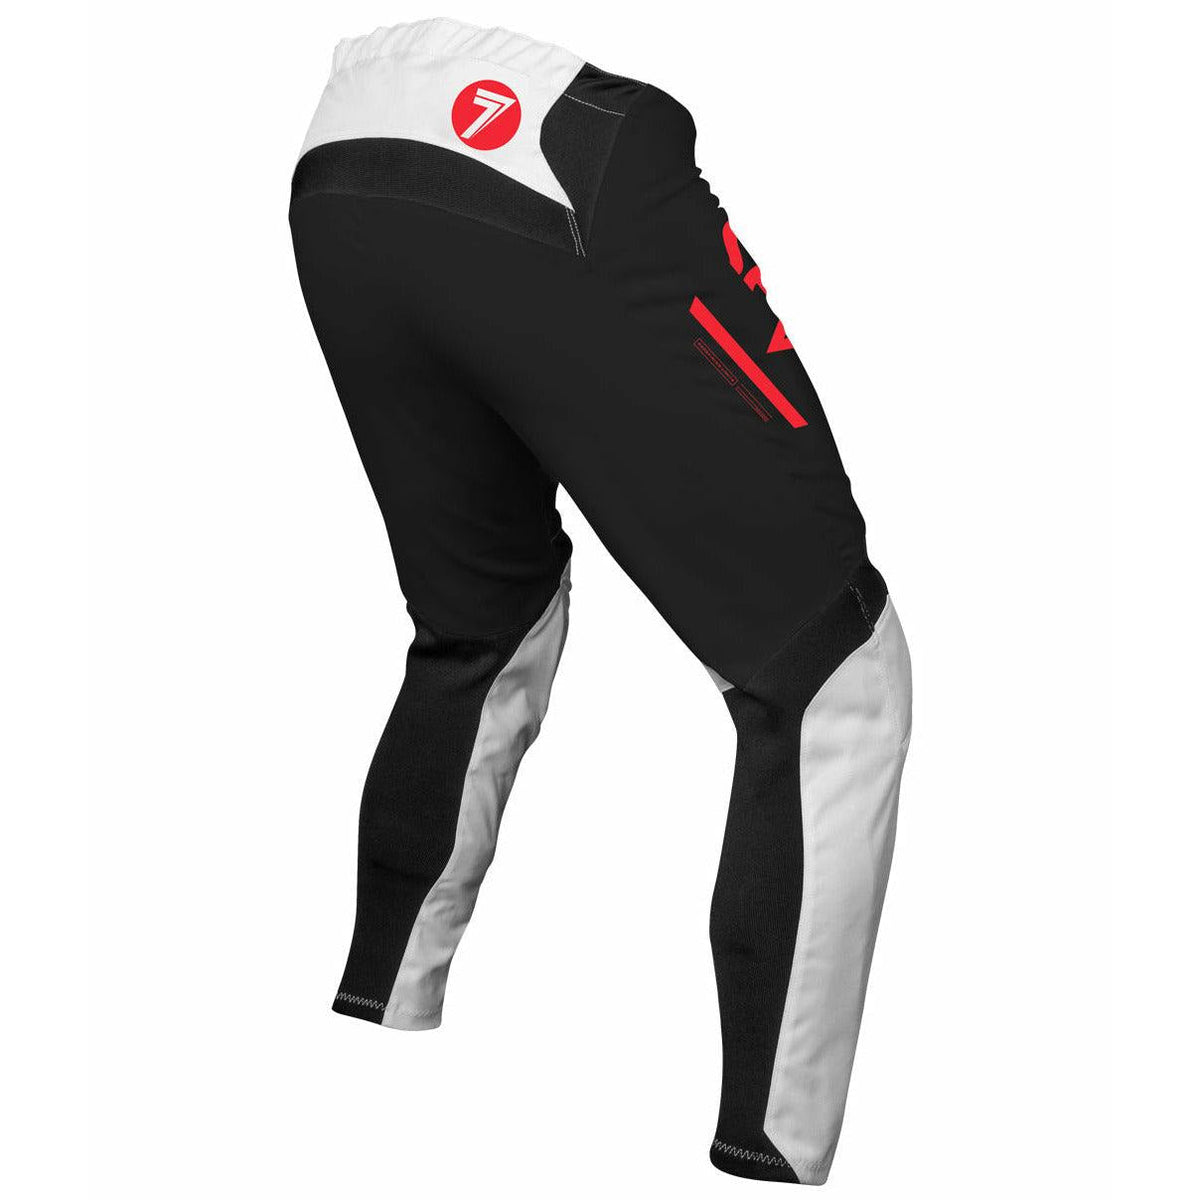 SEVEN-YOUTH-VOX-PHASER-PANT - Riding Gear - Synik Clothing - synikclothing.com